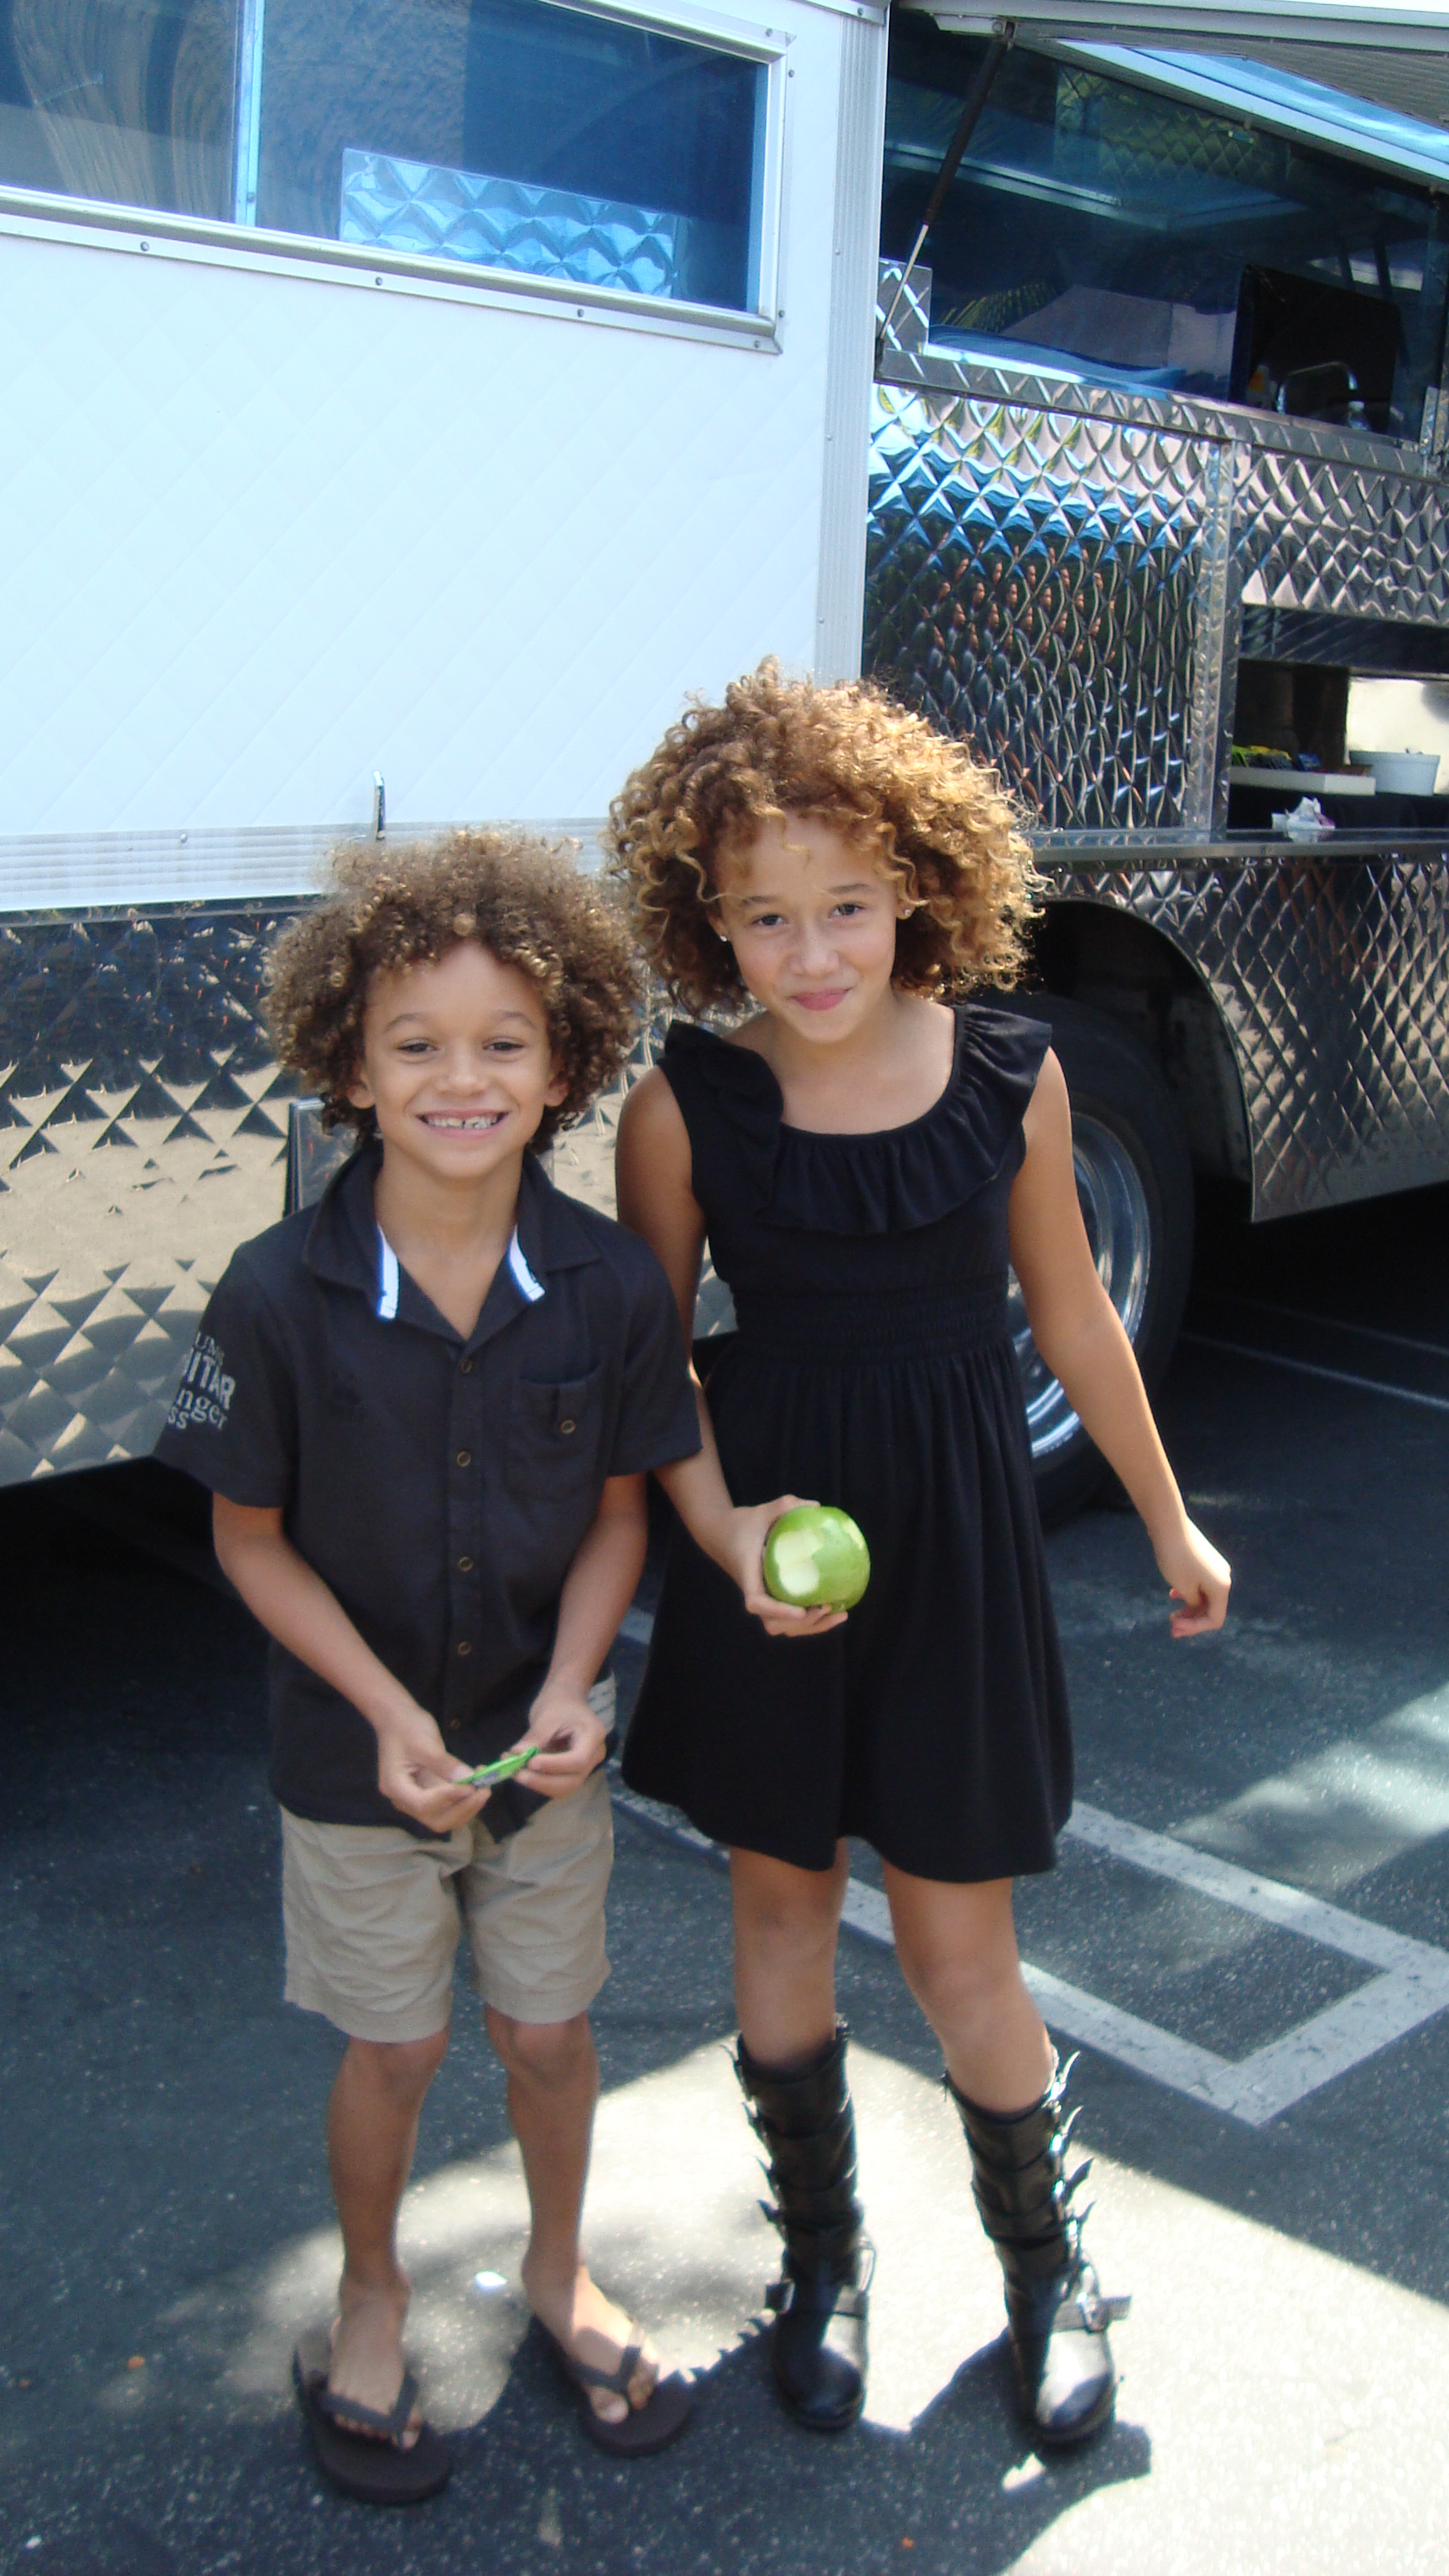 Armani and sister Talia at JcPenney national commercial shoot.